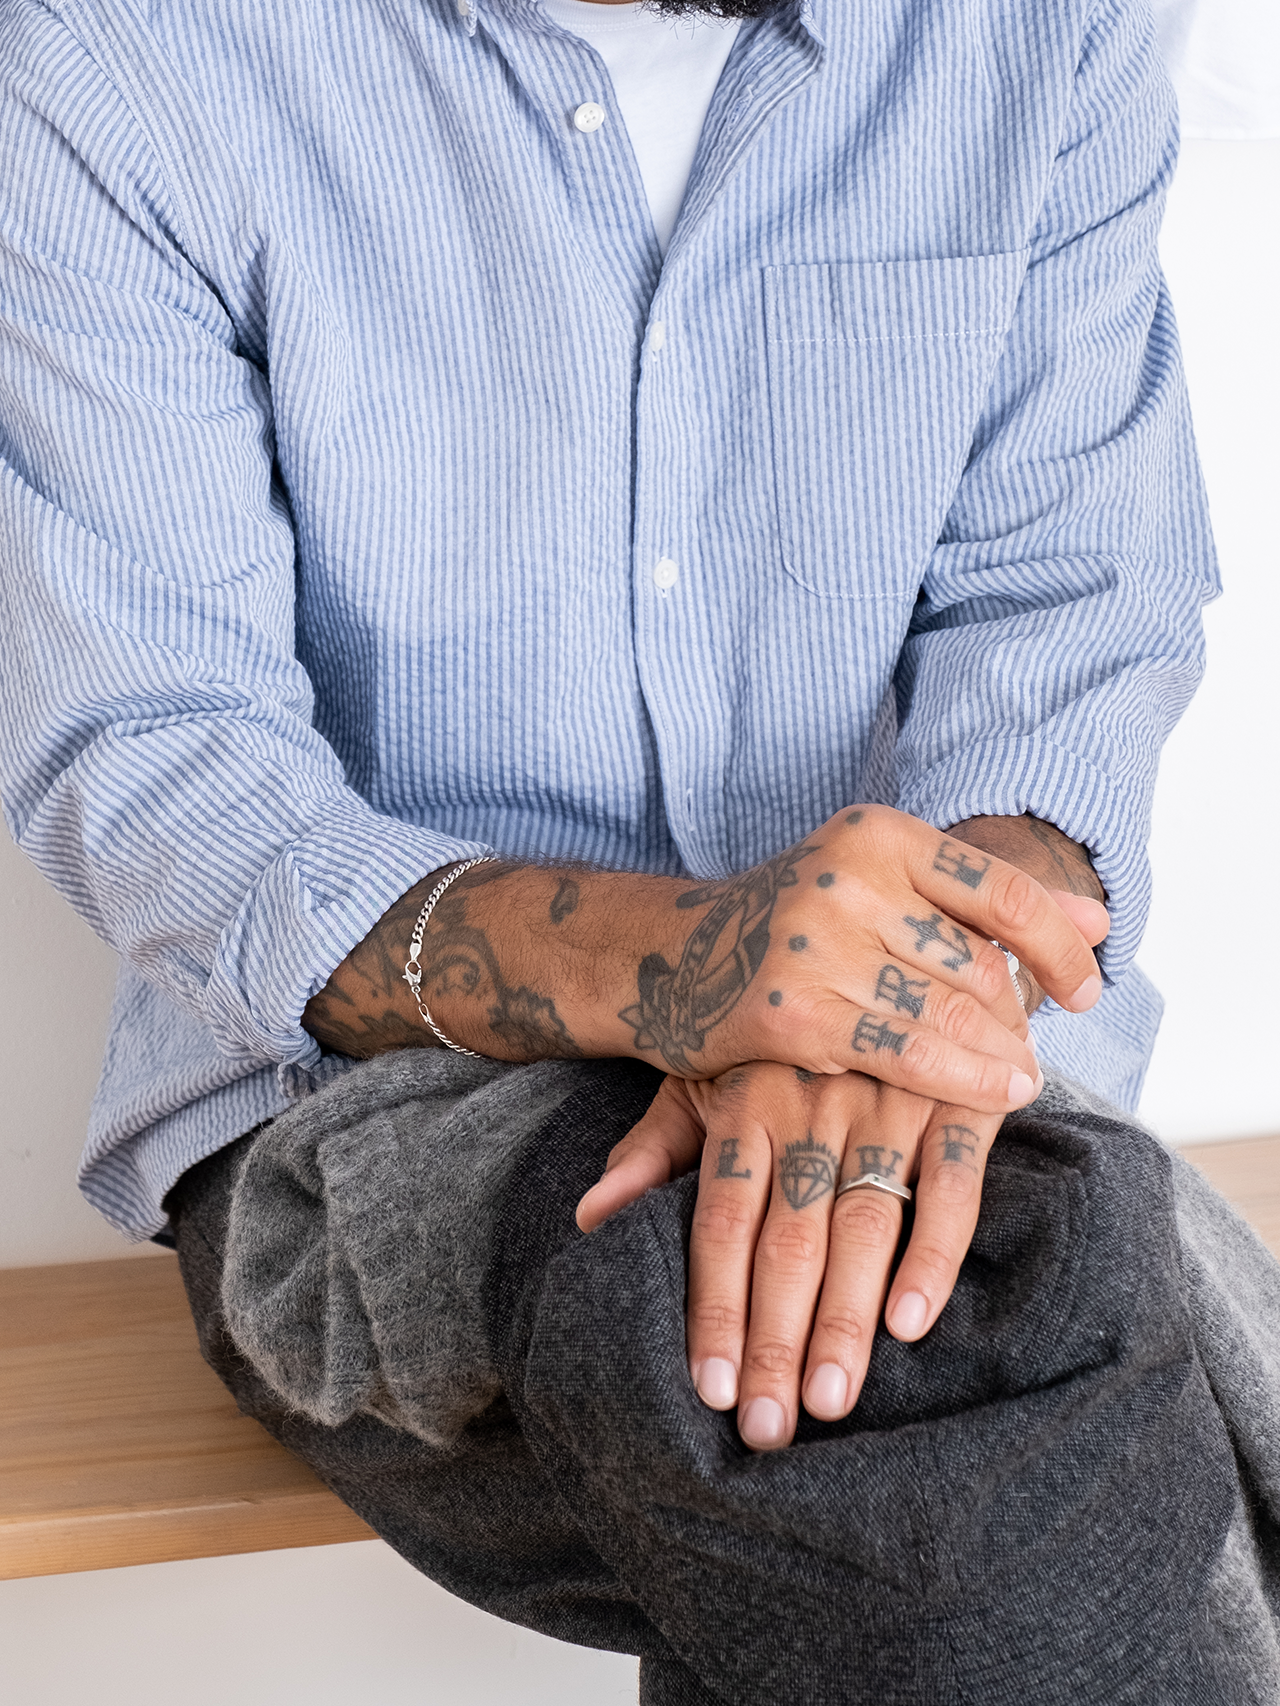 A man wearing the Raeburn Shirt by designer brand KESTIN, made from a striped Seersucker material, with the sleeves rolled up to show traditional arm and hand tattoos.